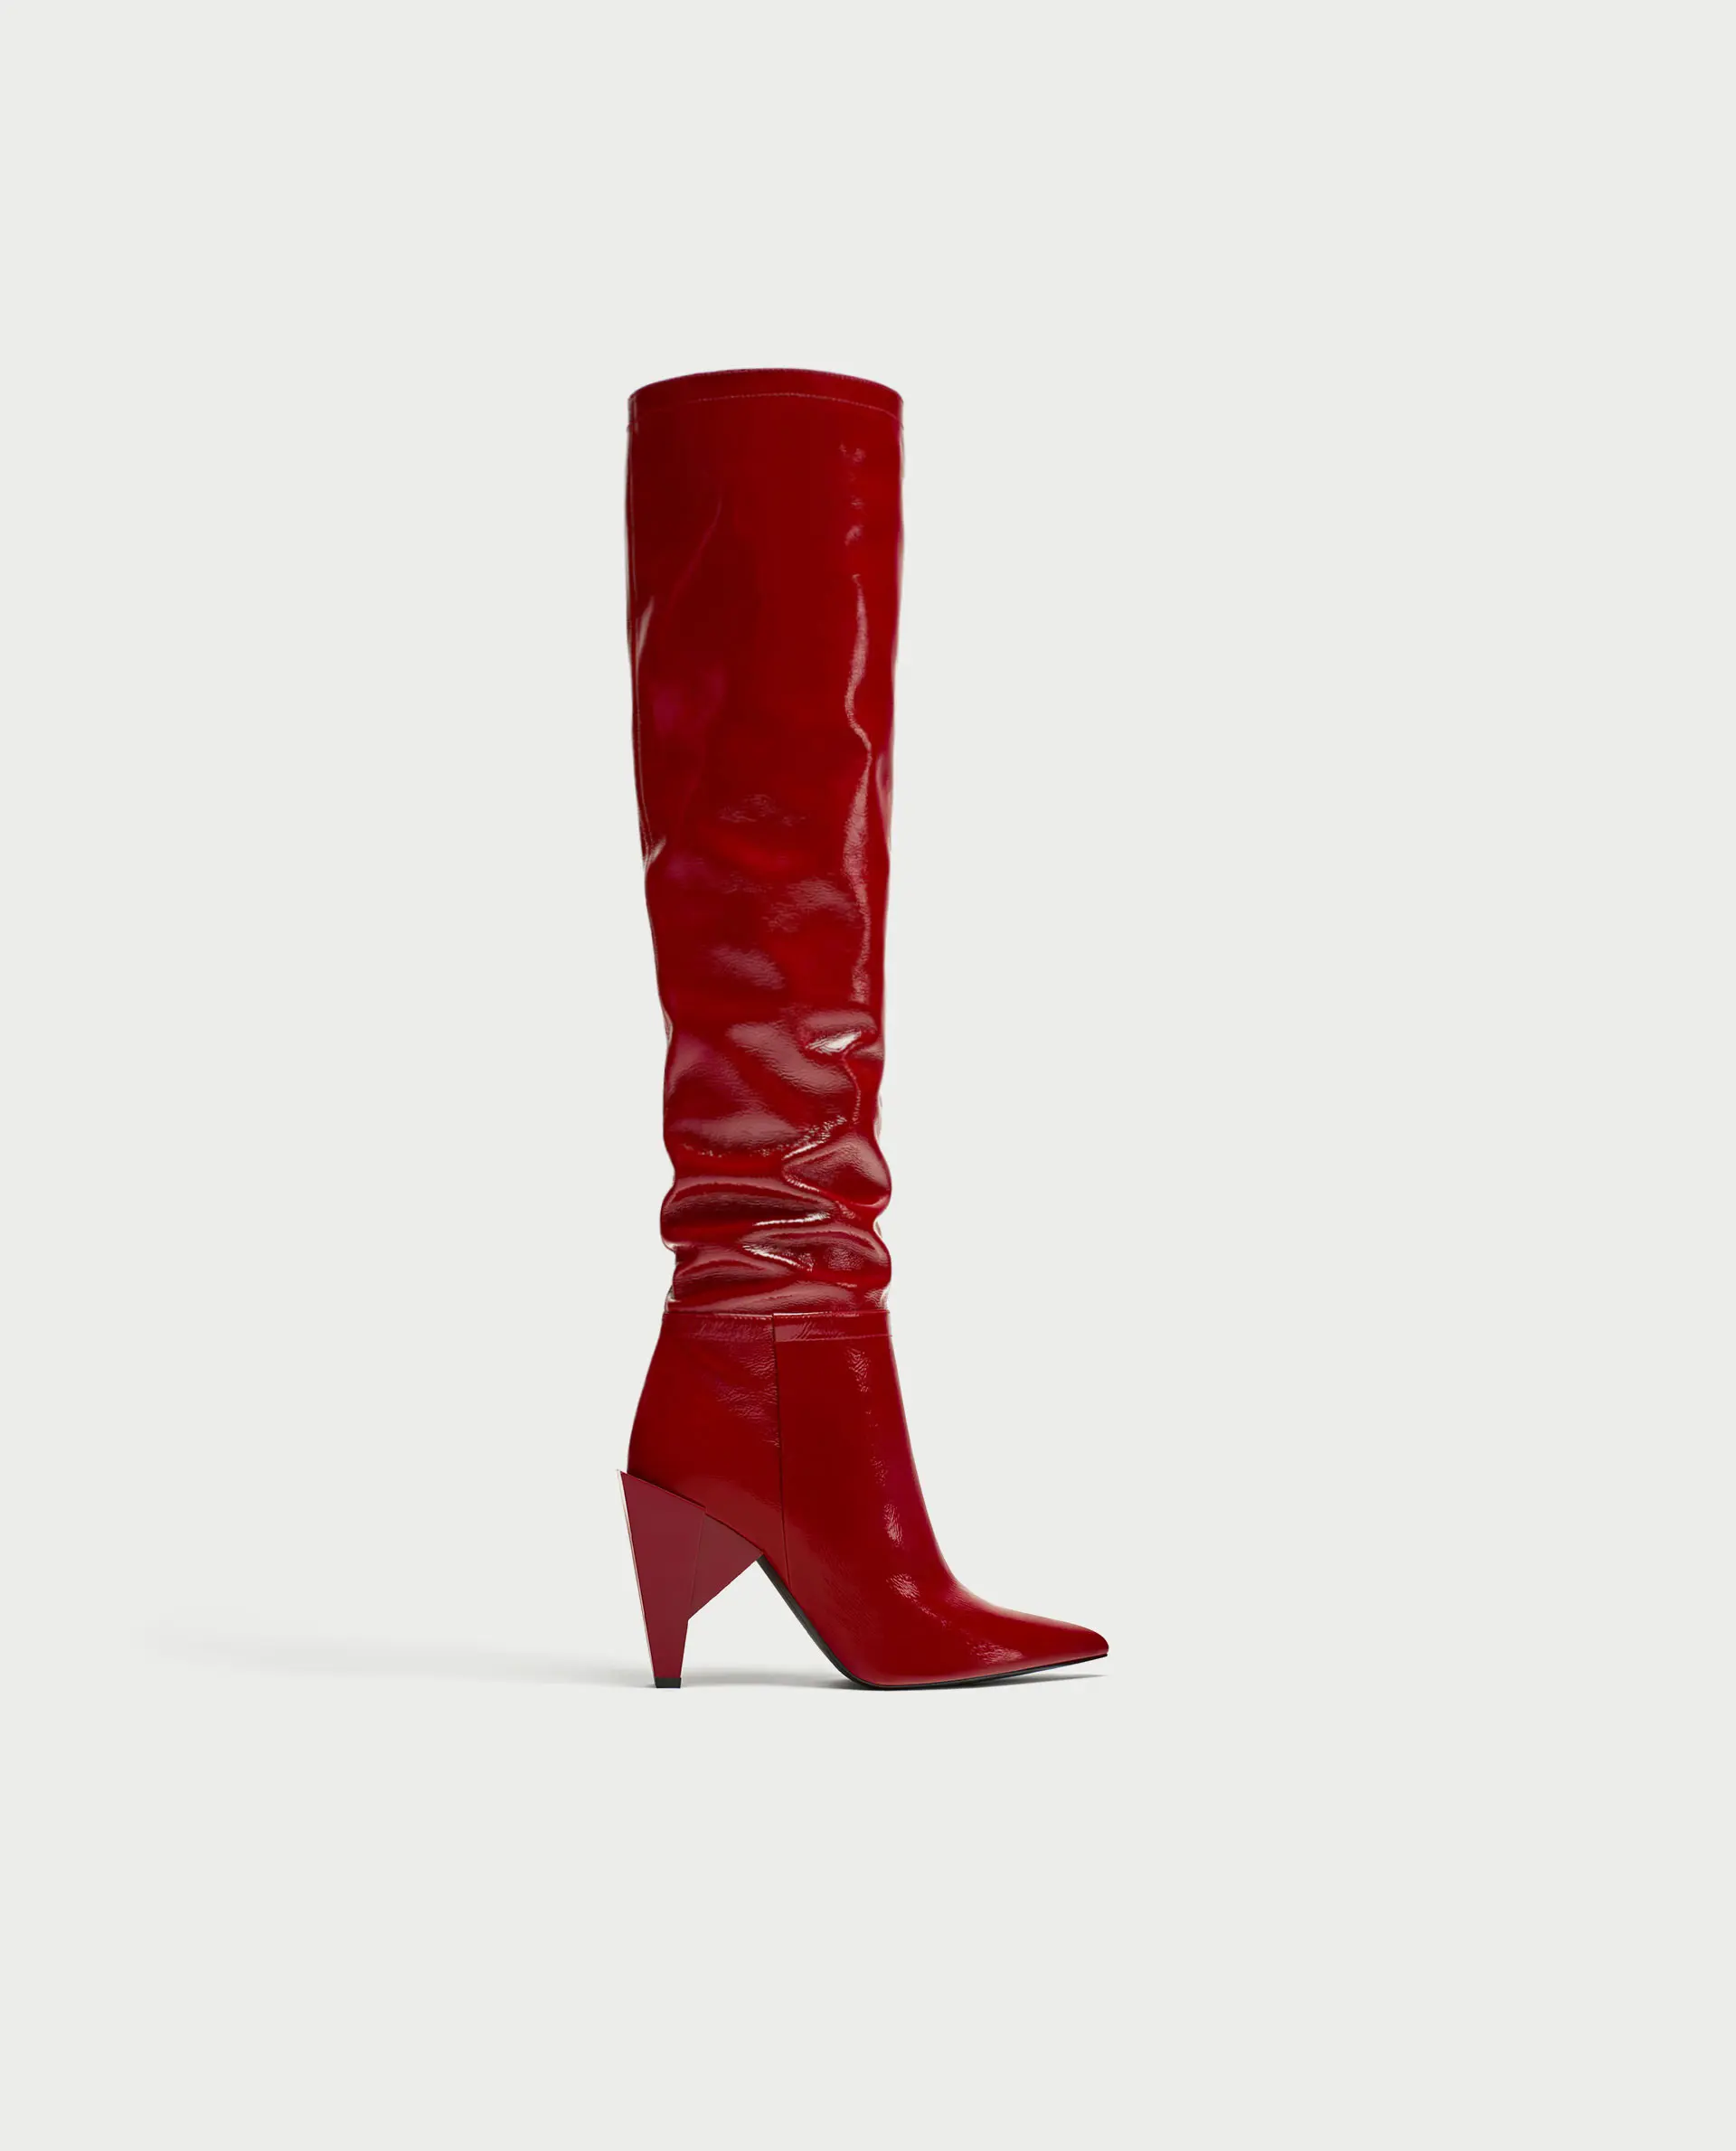 Patent leather boots, Rp 2.599.000, Zara.